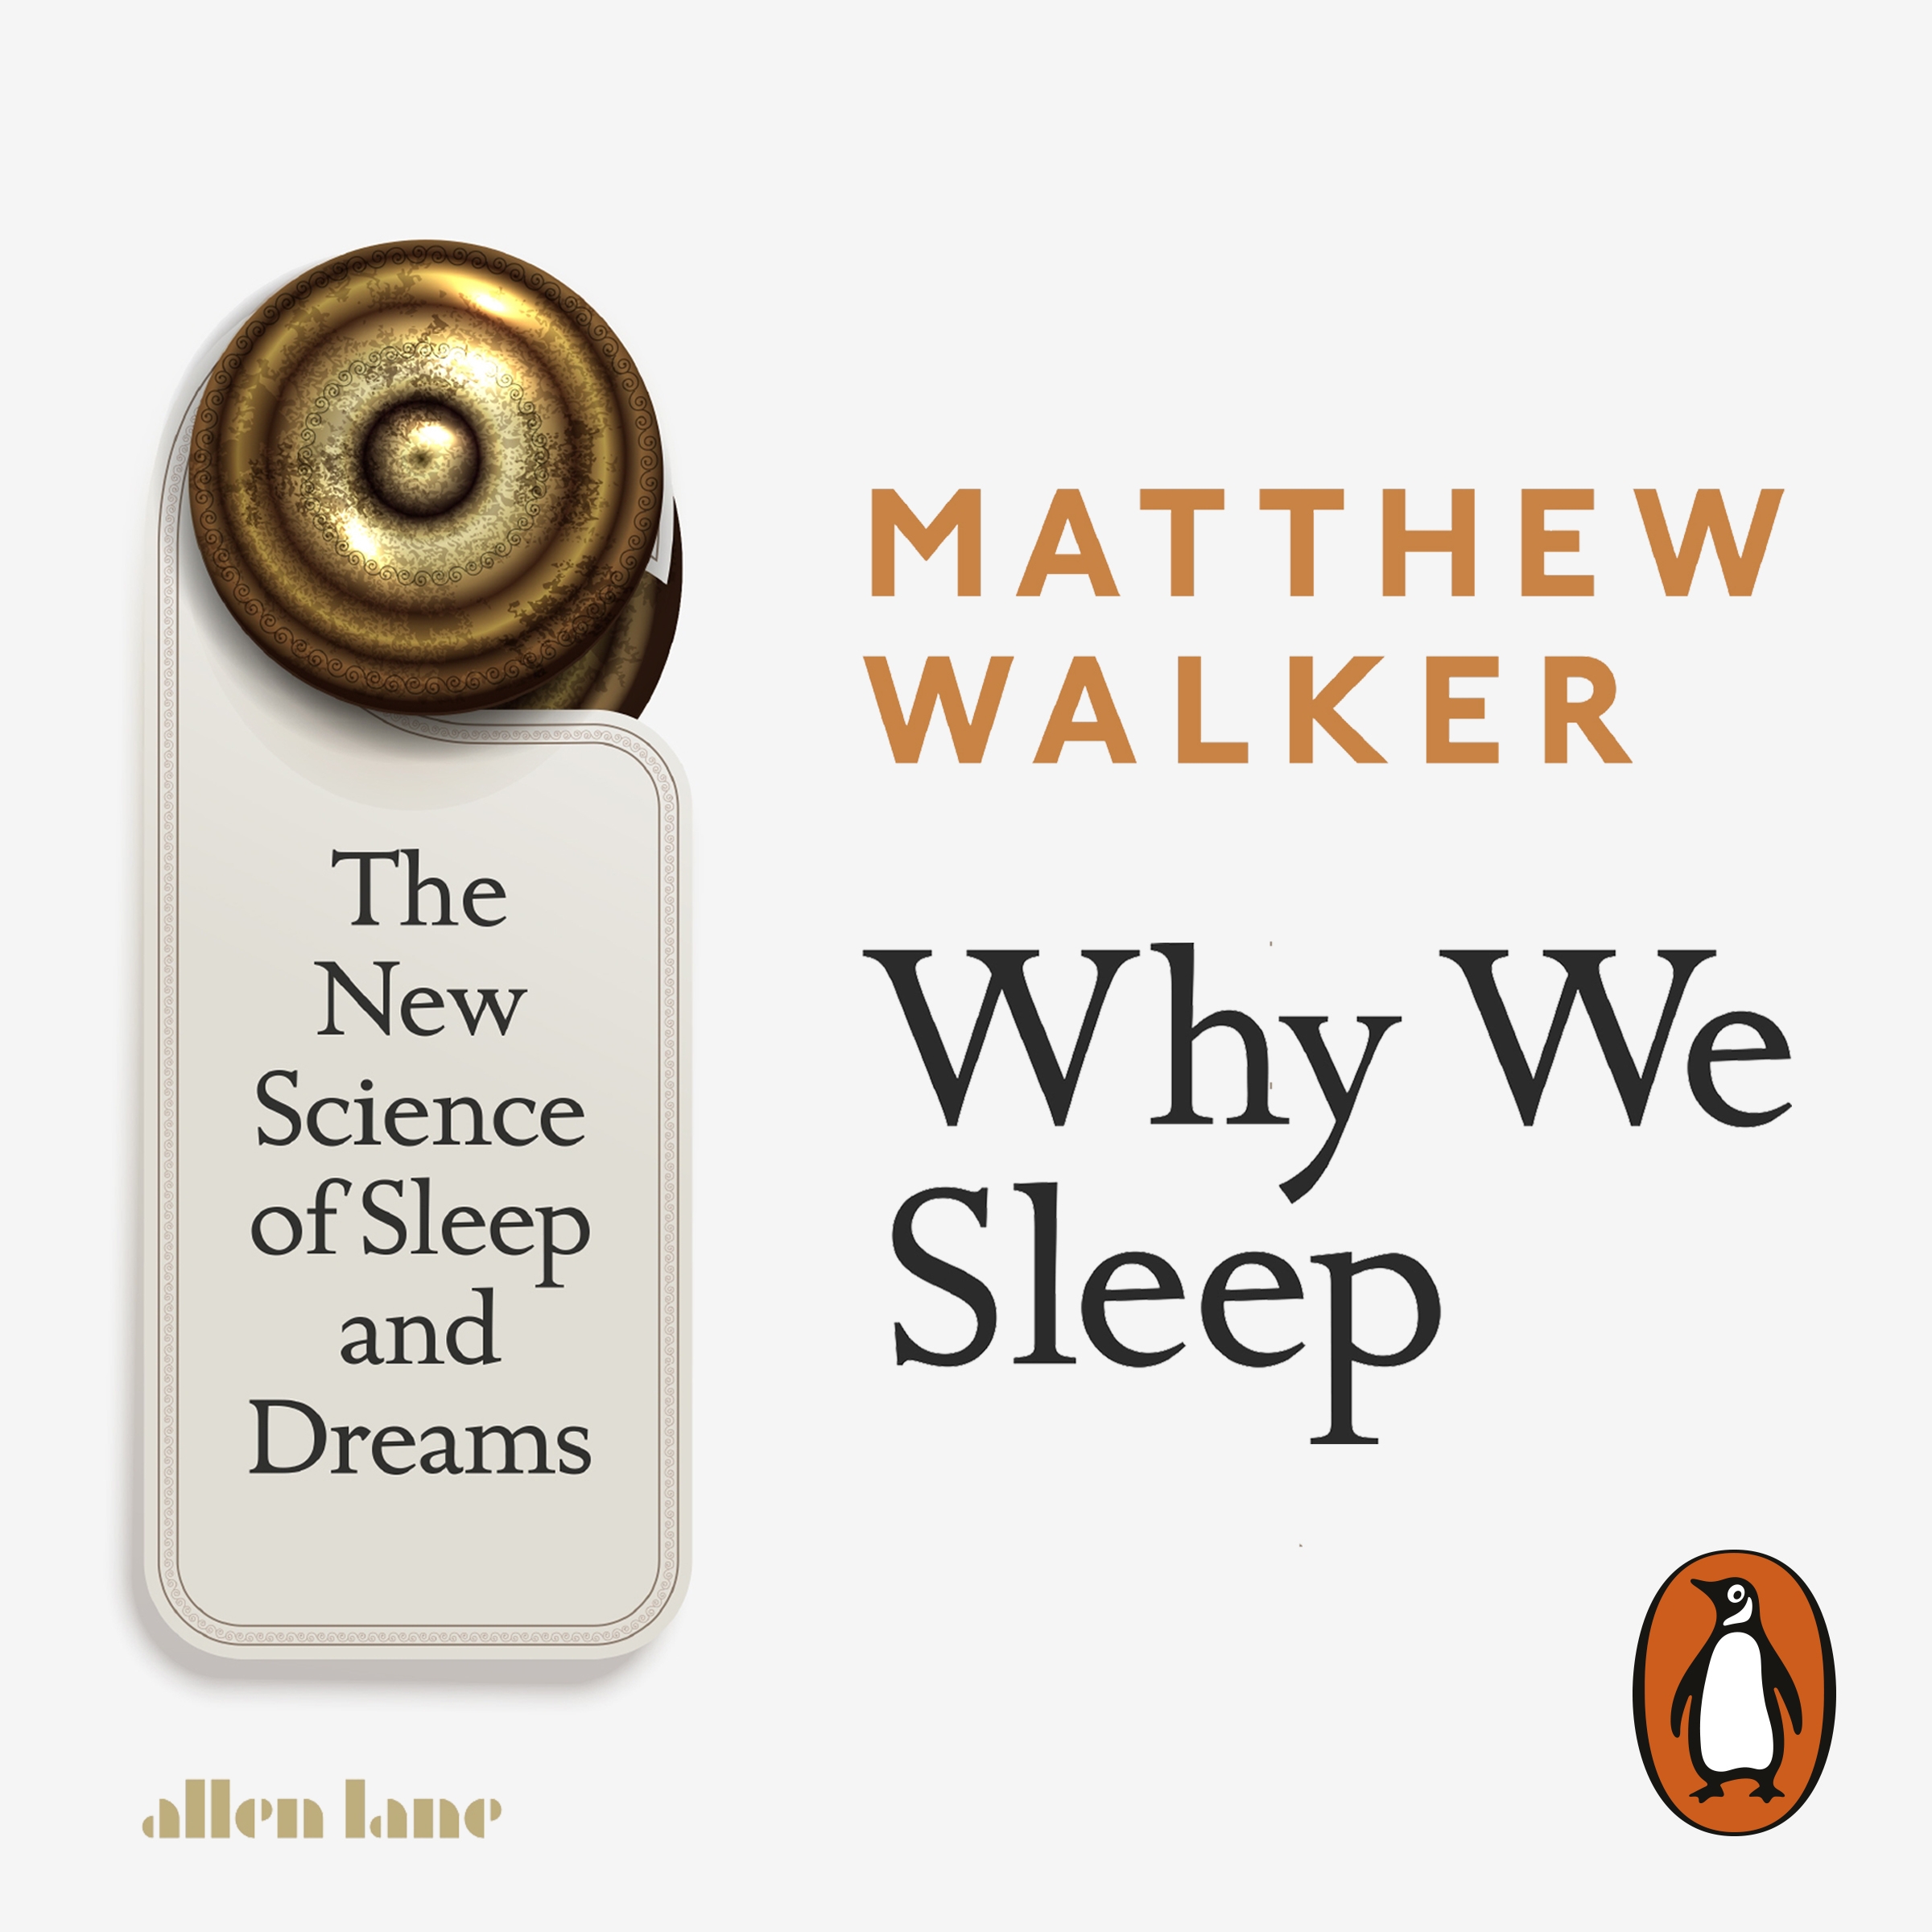 Audiobook image for Why We Sleep: white background with a door handle on the left. Author's name in orange at the top, and the title below it in bigger black text. A 'Do not disturb'-style sign hangs off the door handle, bearing the subtitle: "The New Science of Sleep and Dreams".